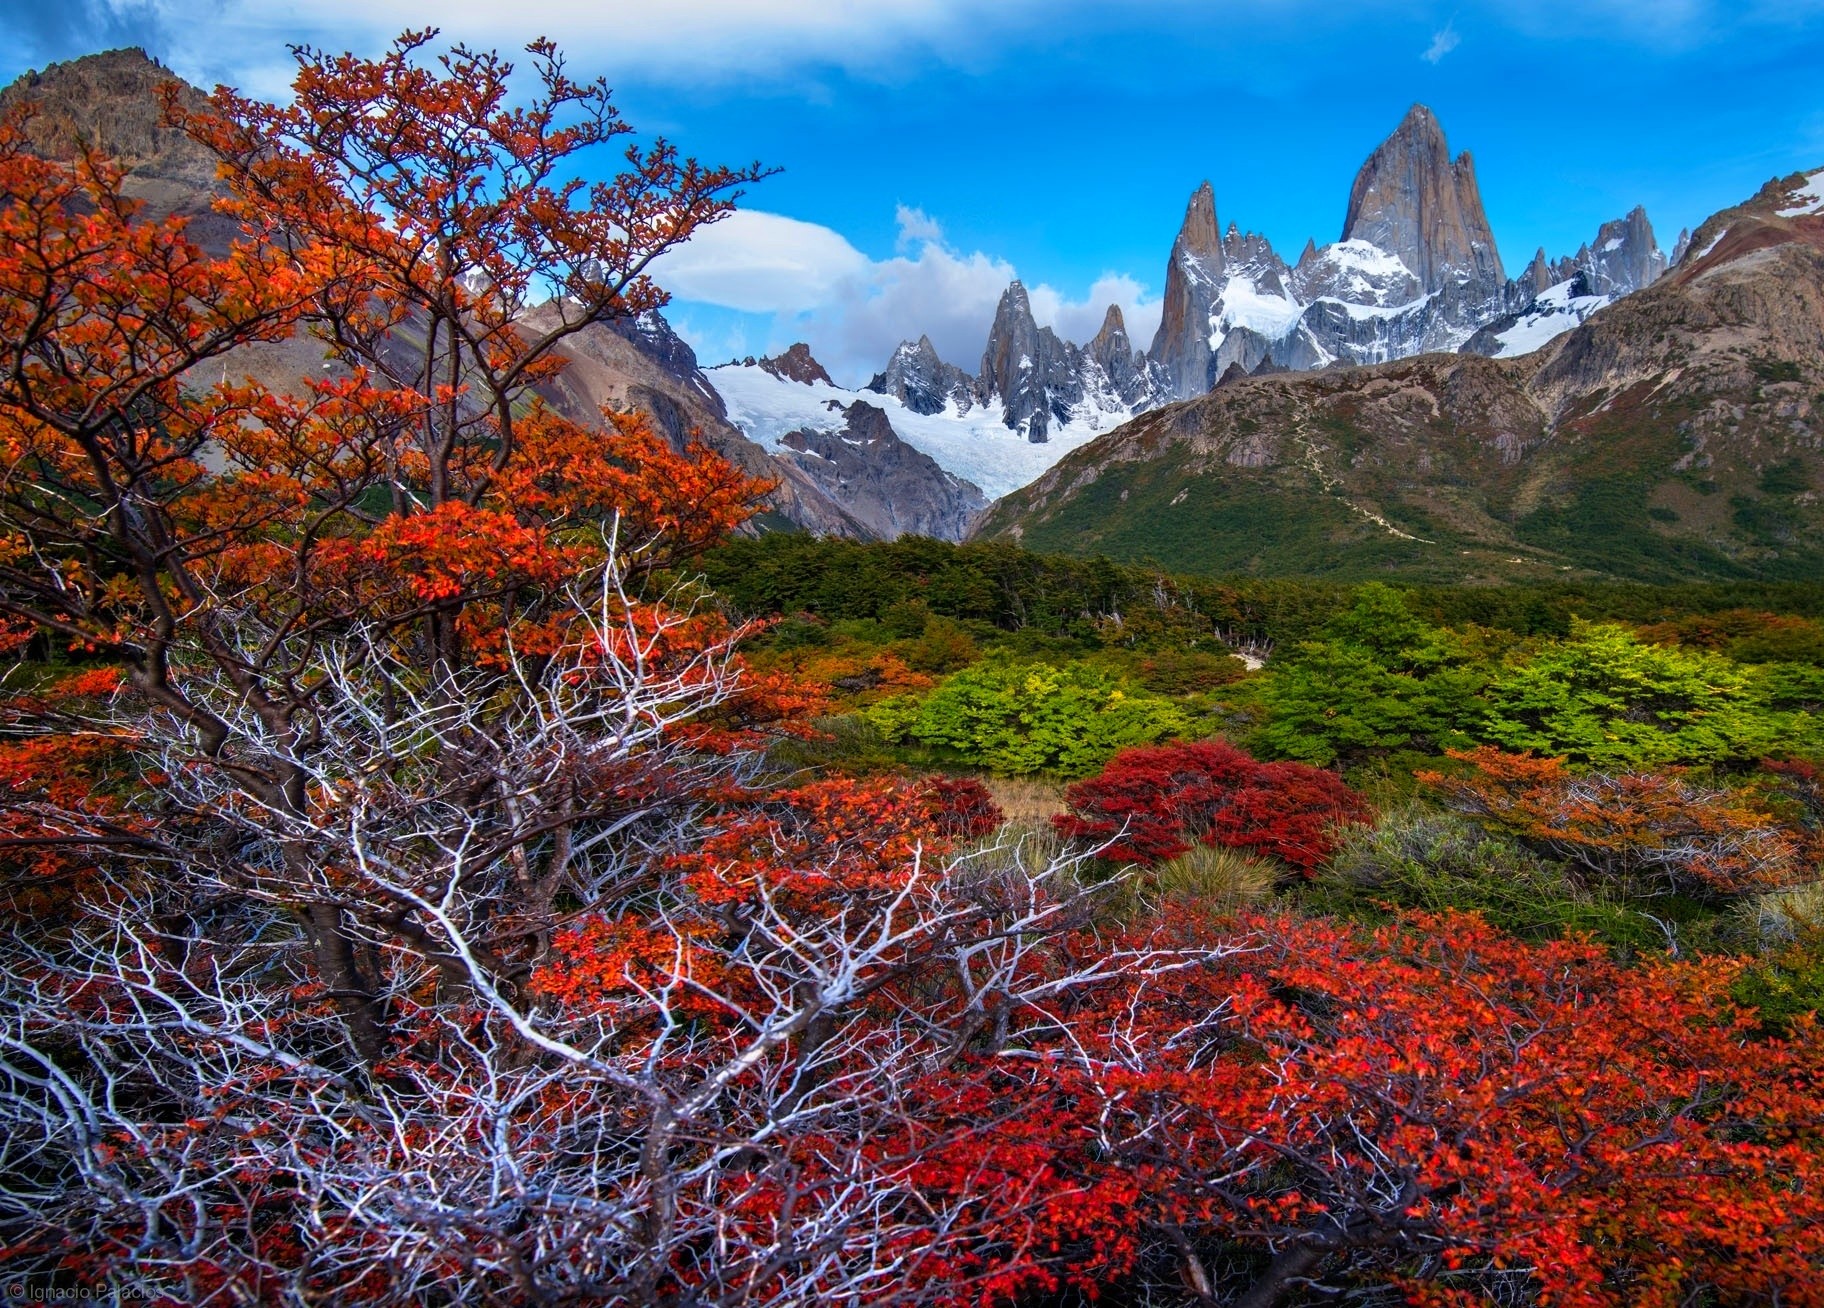 General 1824x1308 fall mountains forest Patagonia trees snowy peak Argentina nature landscape